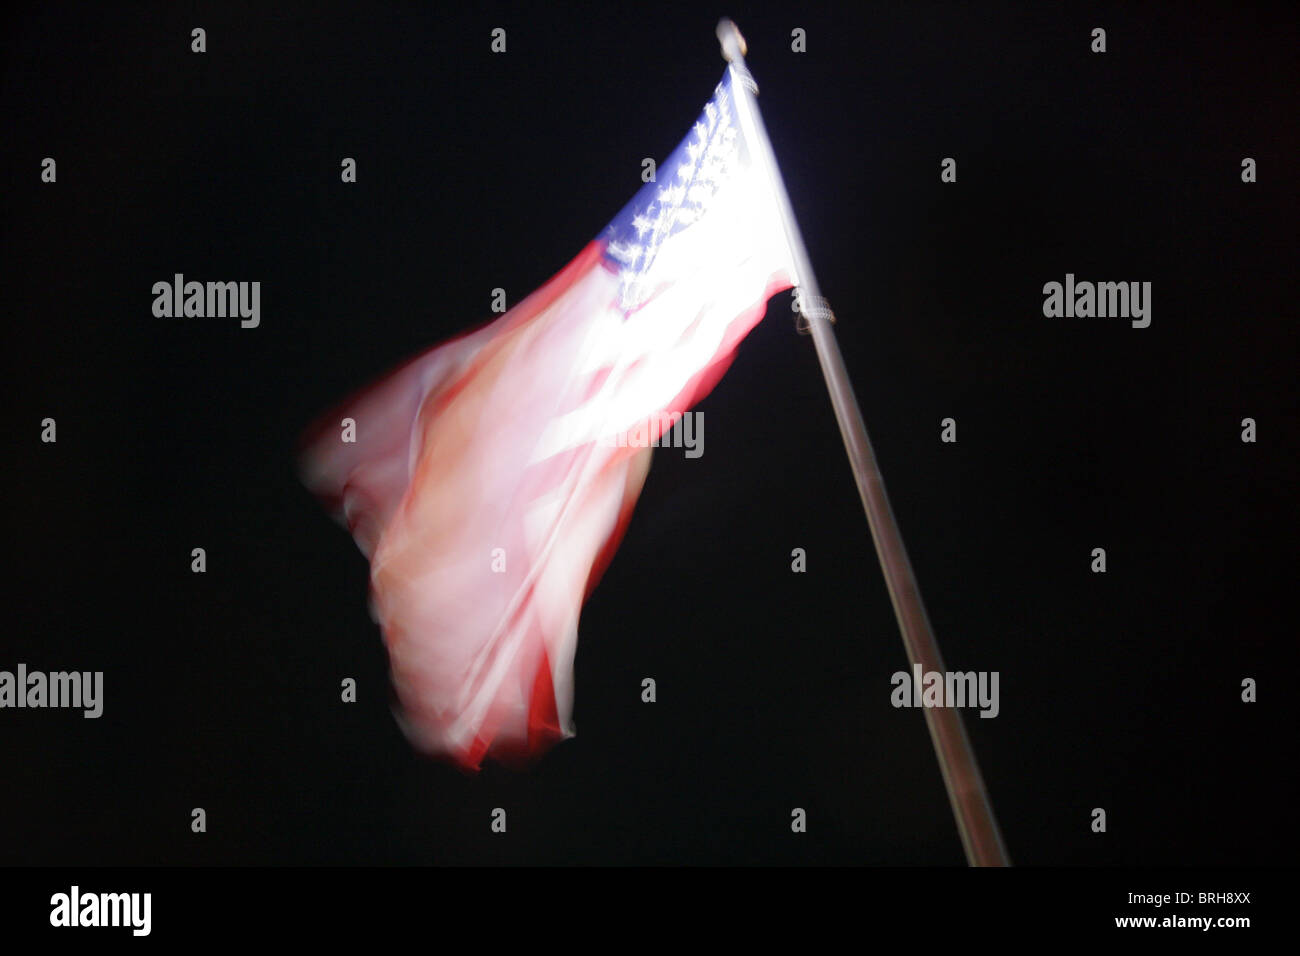 Blurred image of American flag fluttering in the wind. Stock Photo